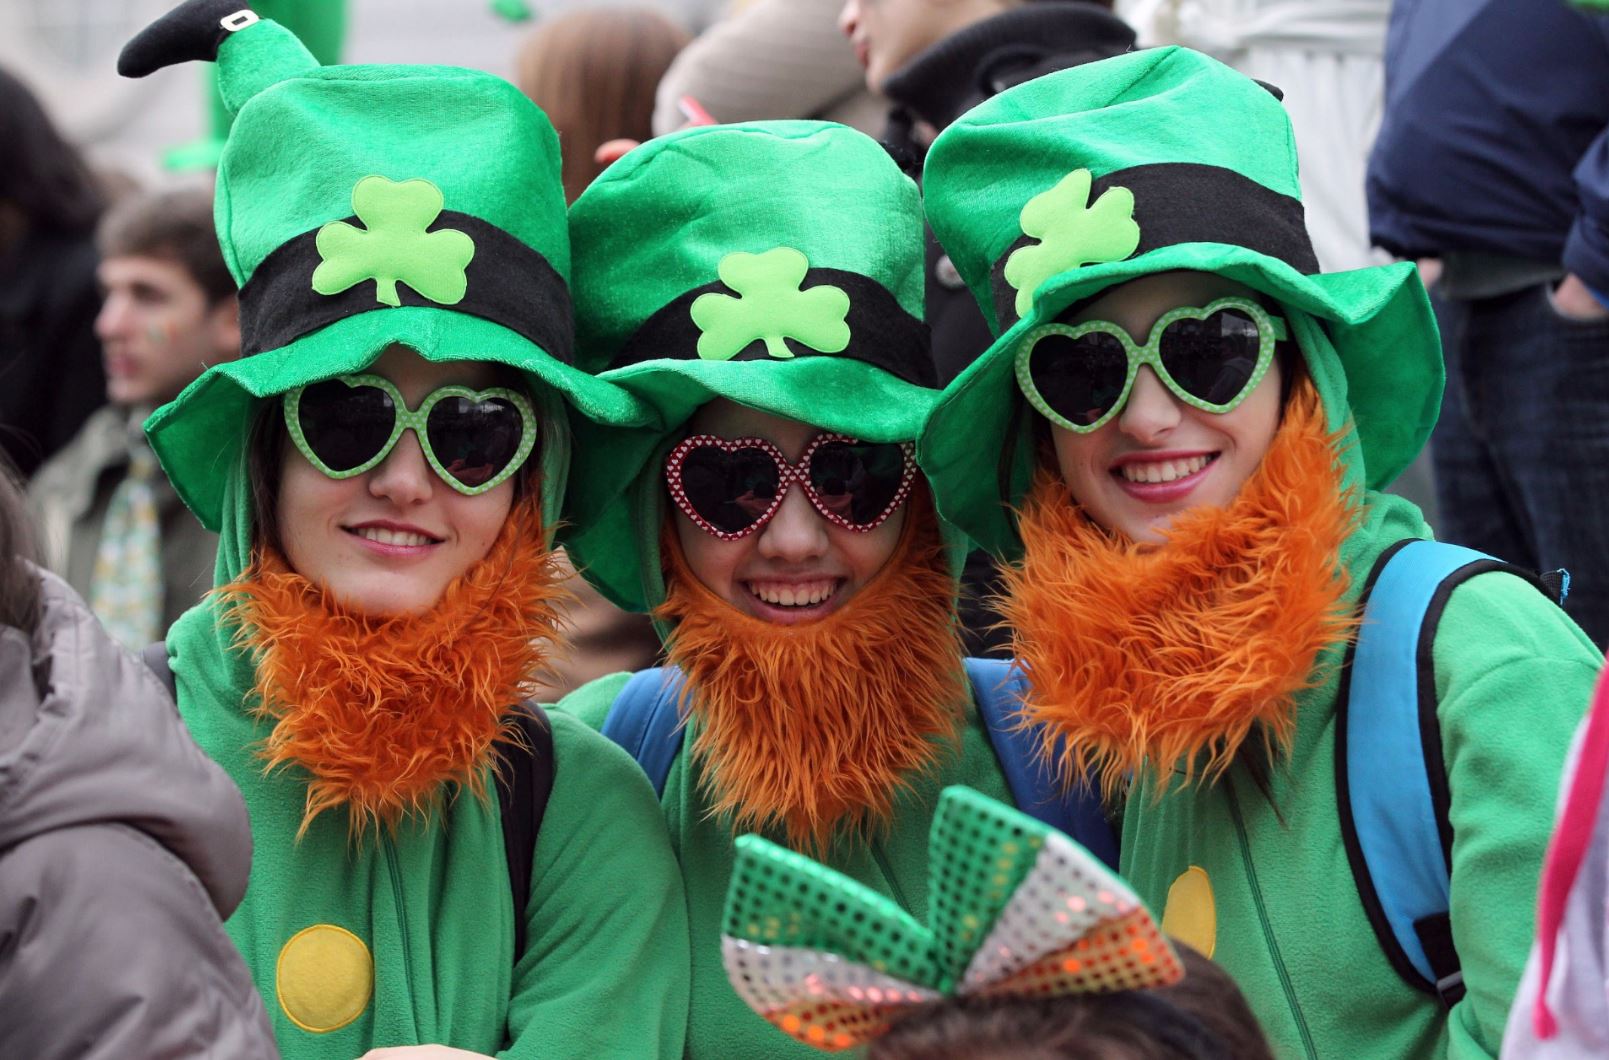 Gaelic Literature Translation - 3 Girls Dressed in Green with Beards